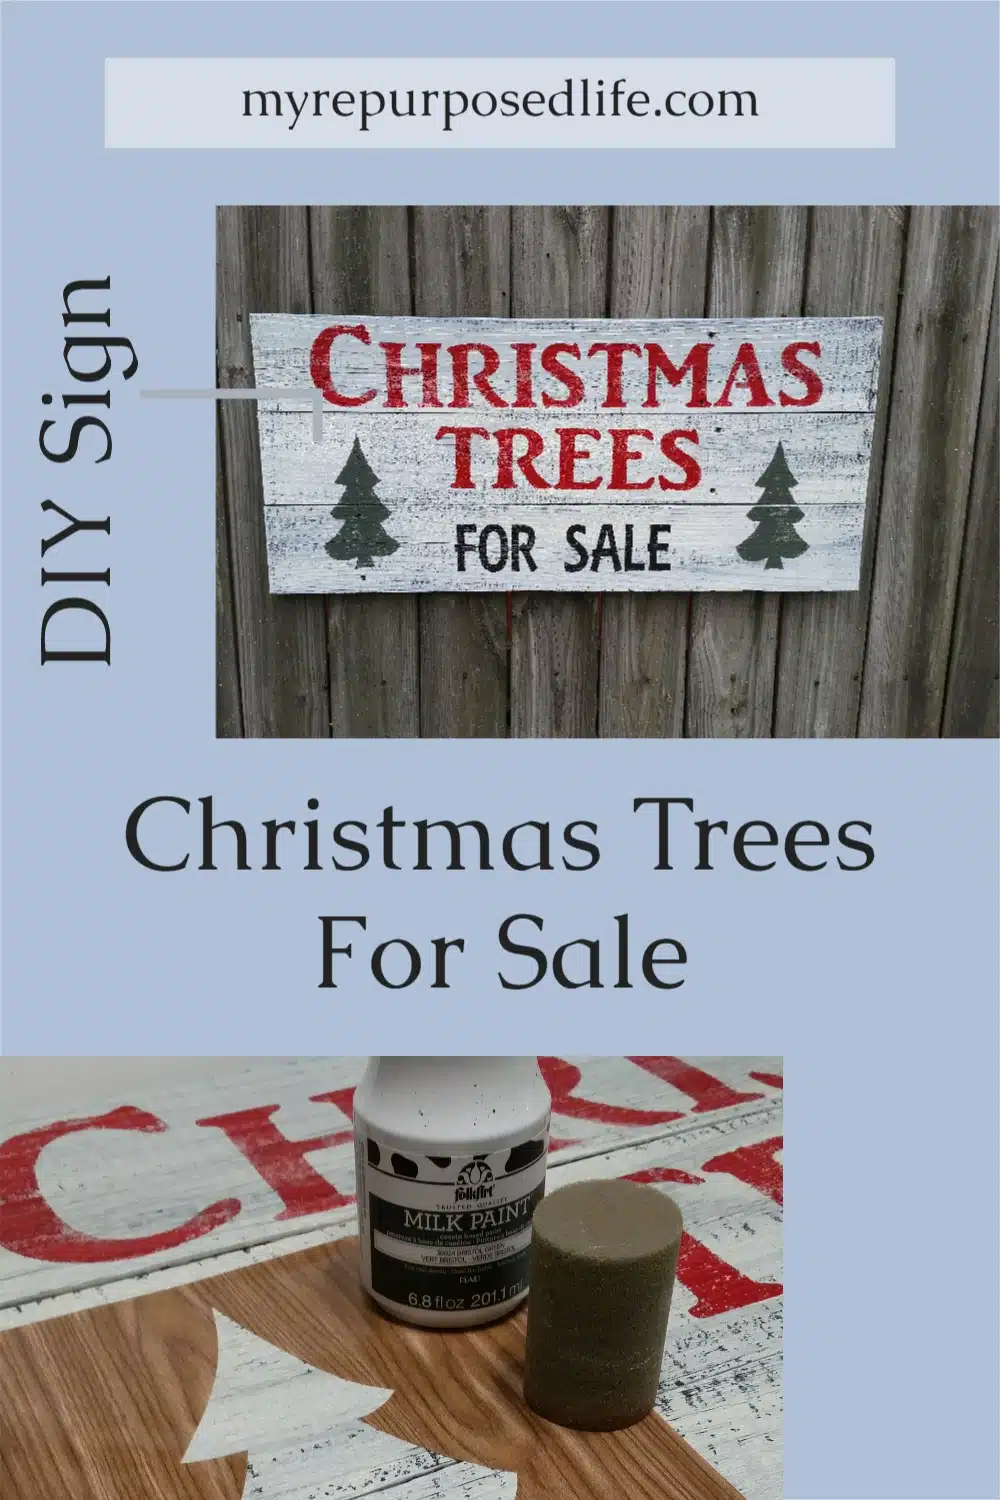 How to make this Christmas Trees for sale sign as seen in a fixer upper kitchen. This easy sign uses contact paper stencils cut with a silhouette portrait. #MyRepurposedLife #upcyle #christmas #treesforsale #sign via @repurposedlife